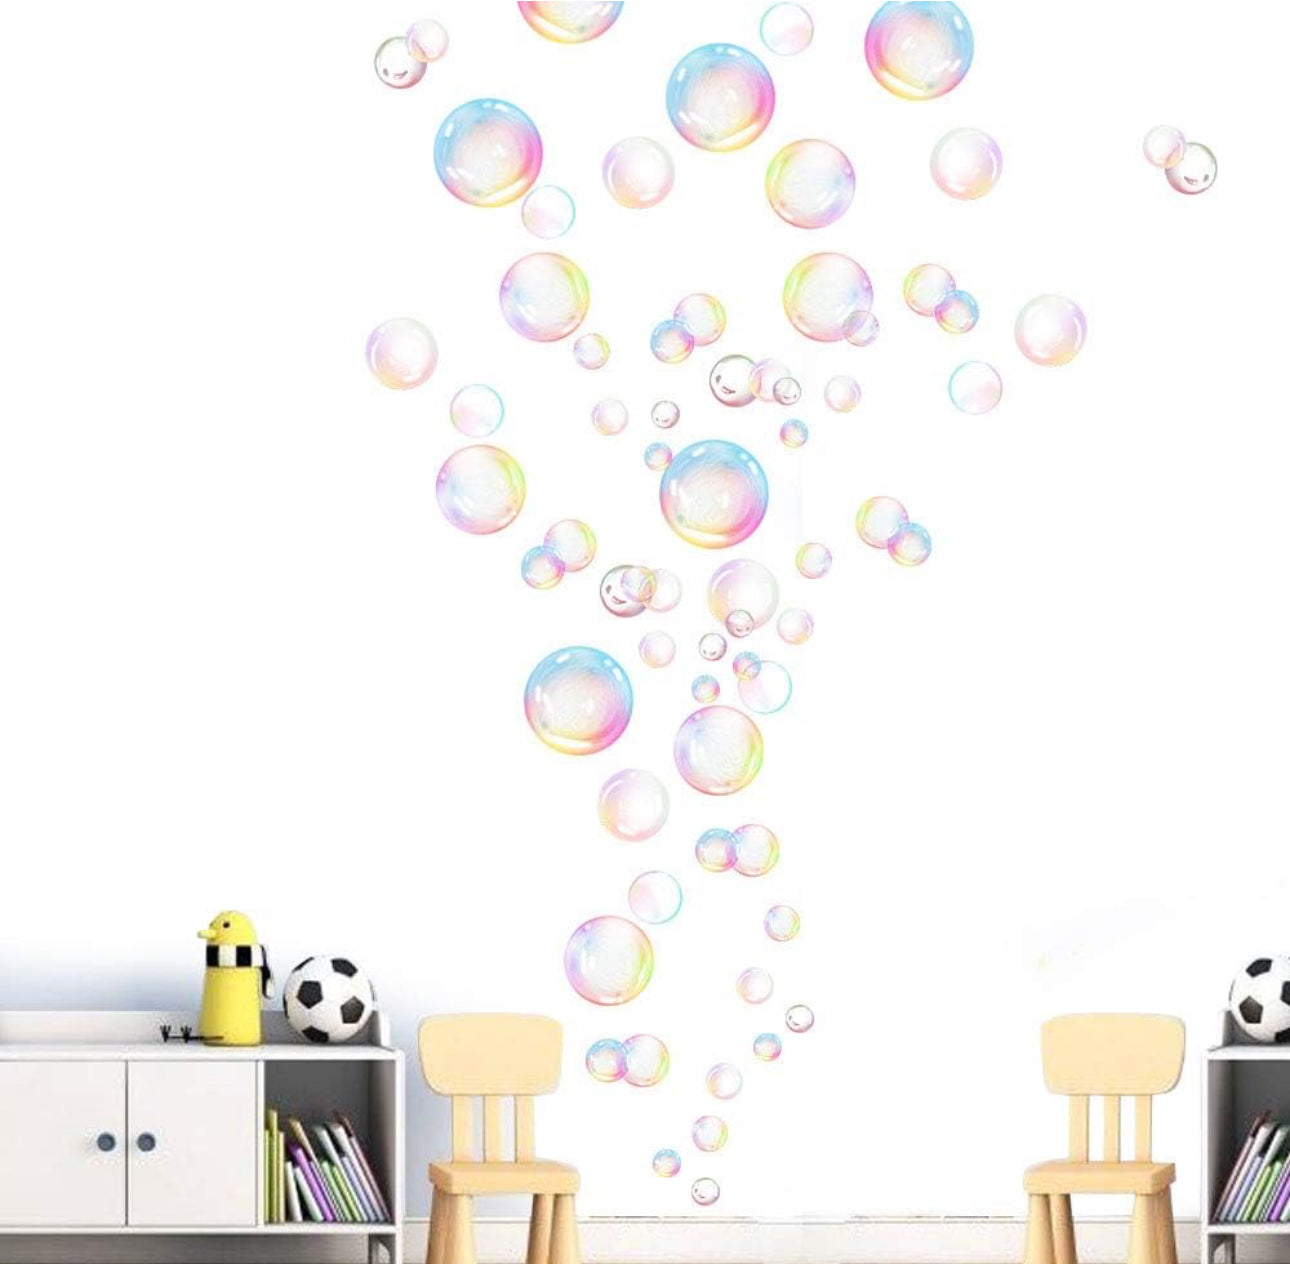 Transparent Bubble Wall Decal Sticker Cutout Kid's Under The Sea Birthday Party Decoration Blue White Colour Bubble Ocean Background Decor Water Soap Bath Decor for Mermaid Baby Shower (Color)